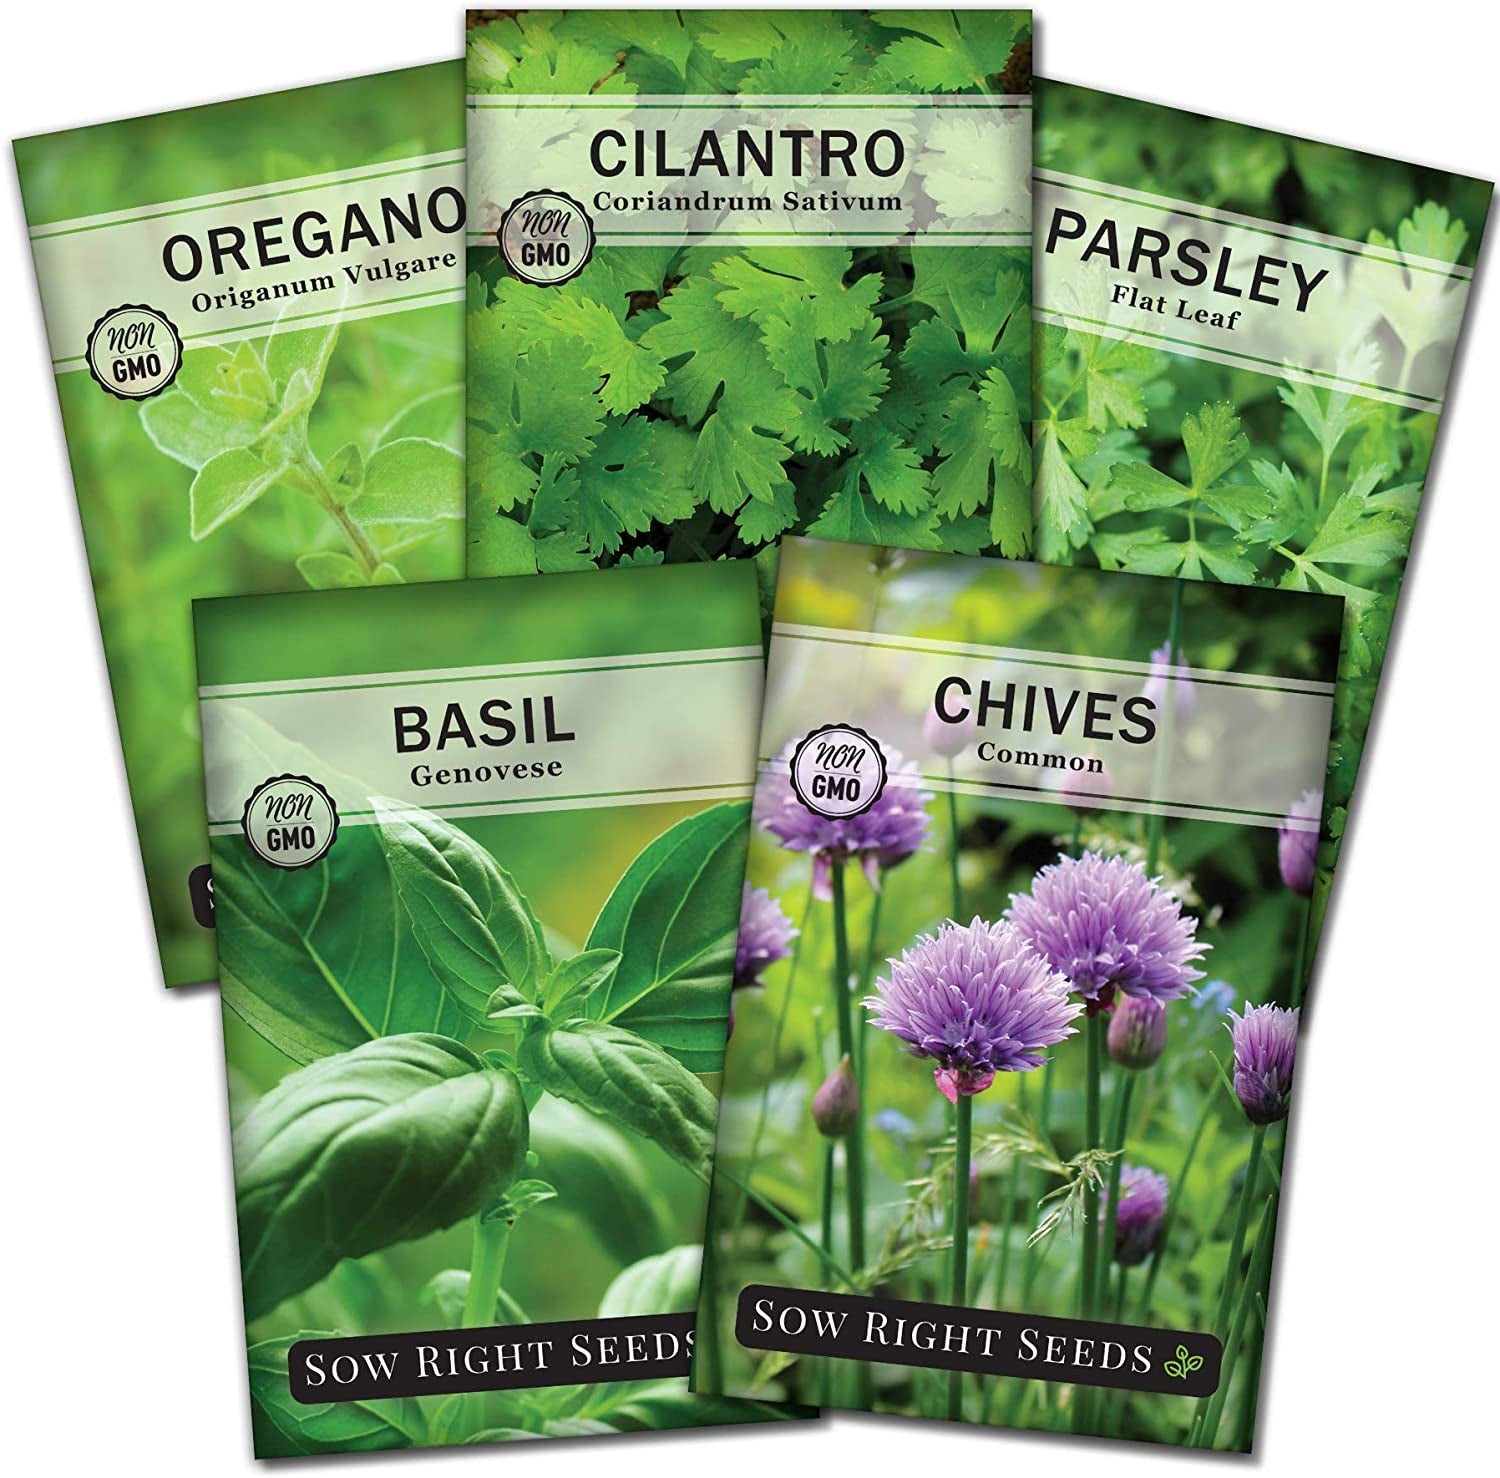 - 5 Herb Seed Collection for Planting - Genovese Basil, Chives, Cilantro, Italian Parsley, and Oregano to Plant and Grow a Home Vegetable Garden - Fresh Assortment Herbal Variety Pack